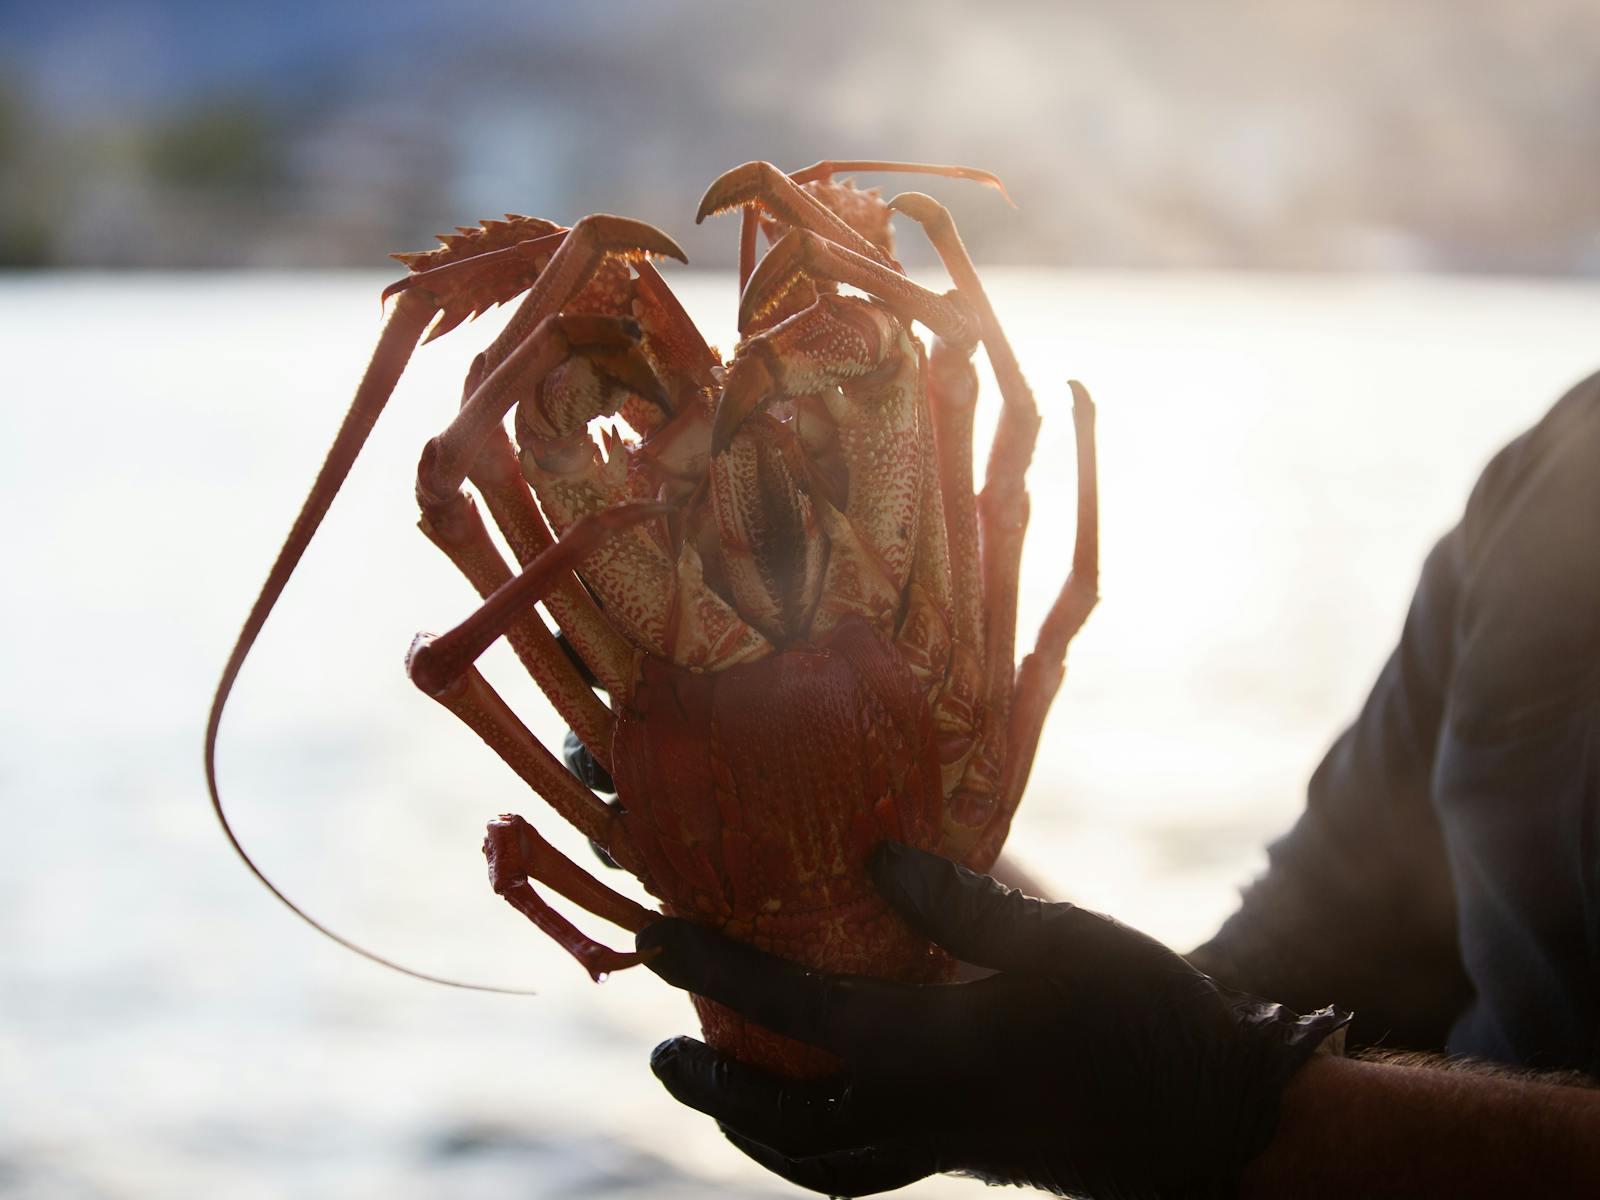 Fresh lobster in the hand of our commercial diver